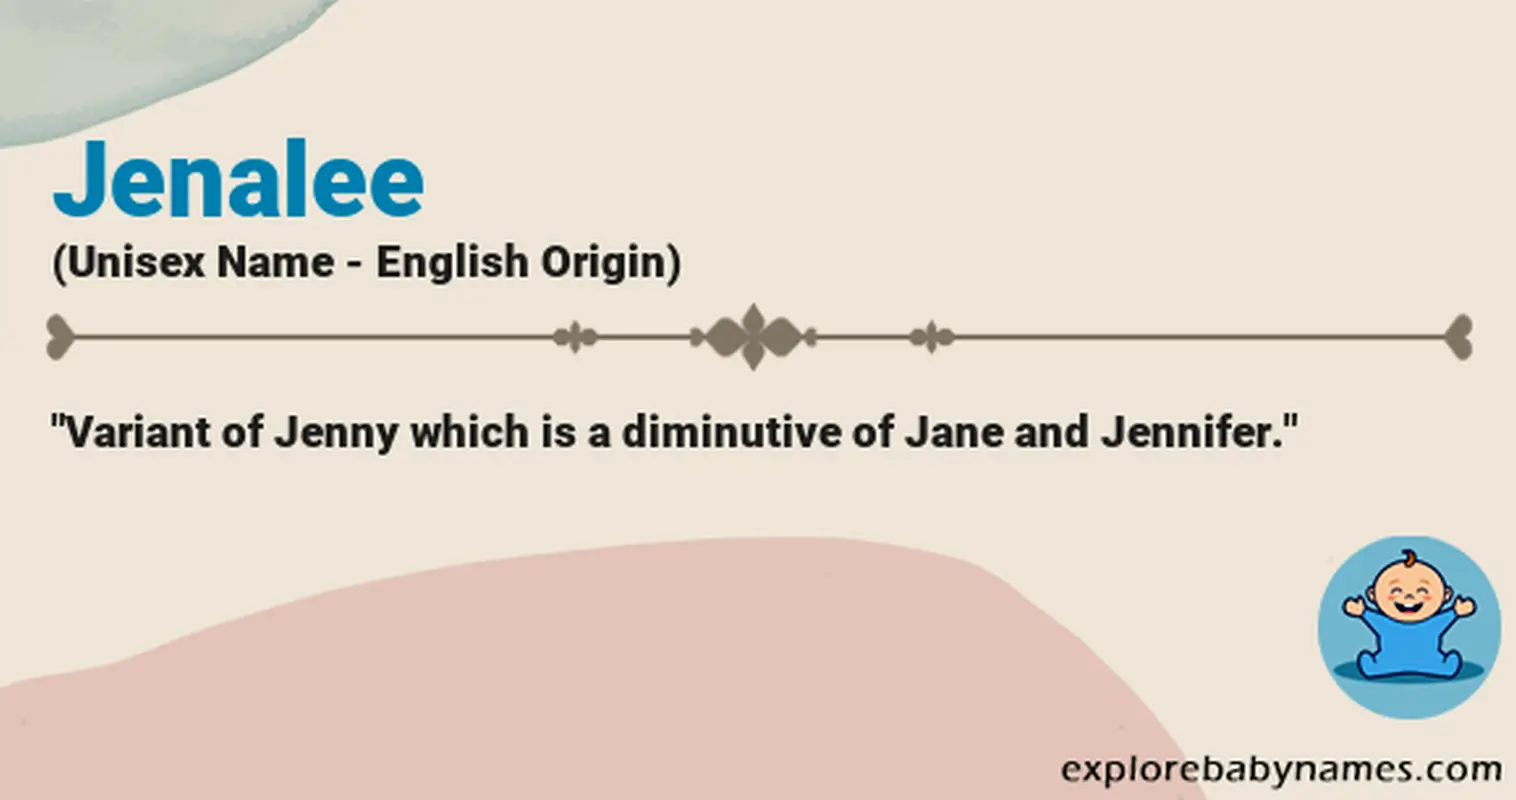 Meaning of Jenalee